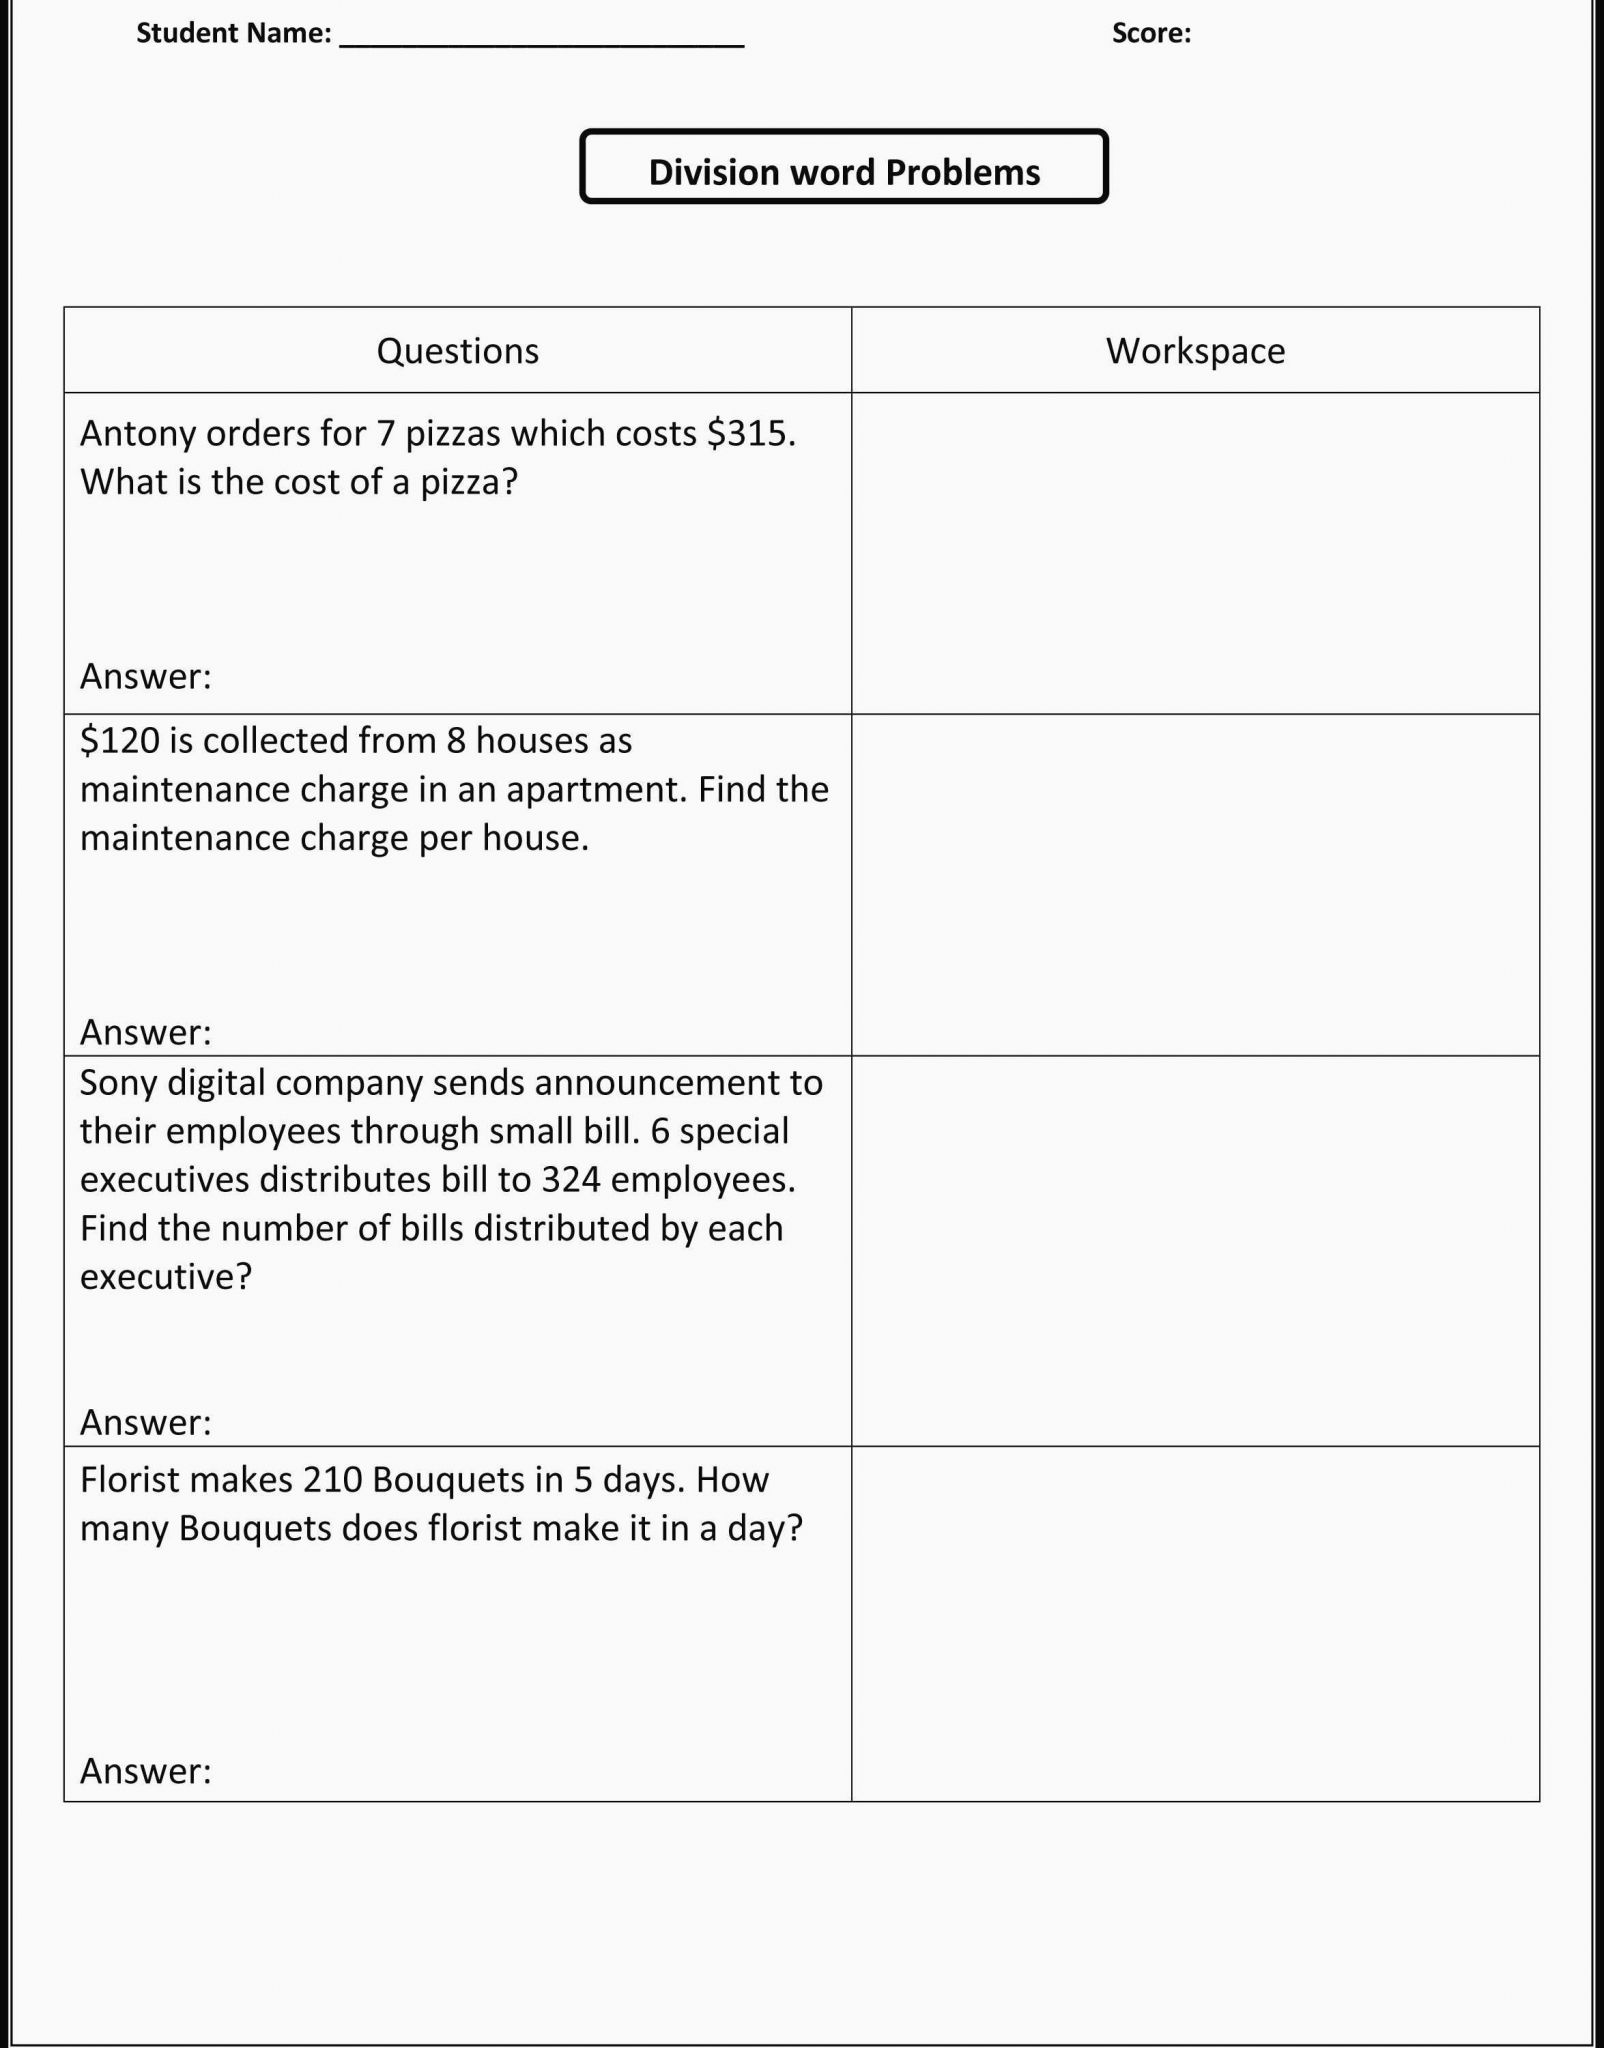 History Of Halloween Worksheet Answers Along with Halloween Math Word Problems Worksheets 4th Grade Wp Landingpages